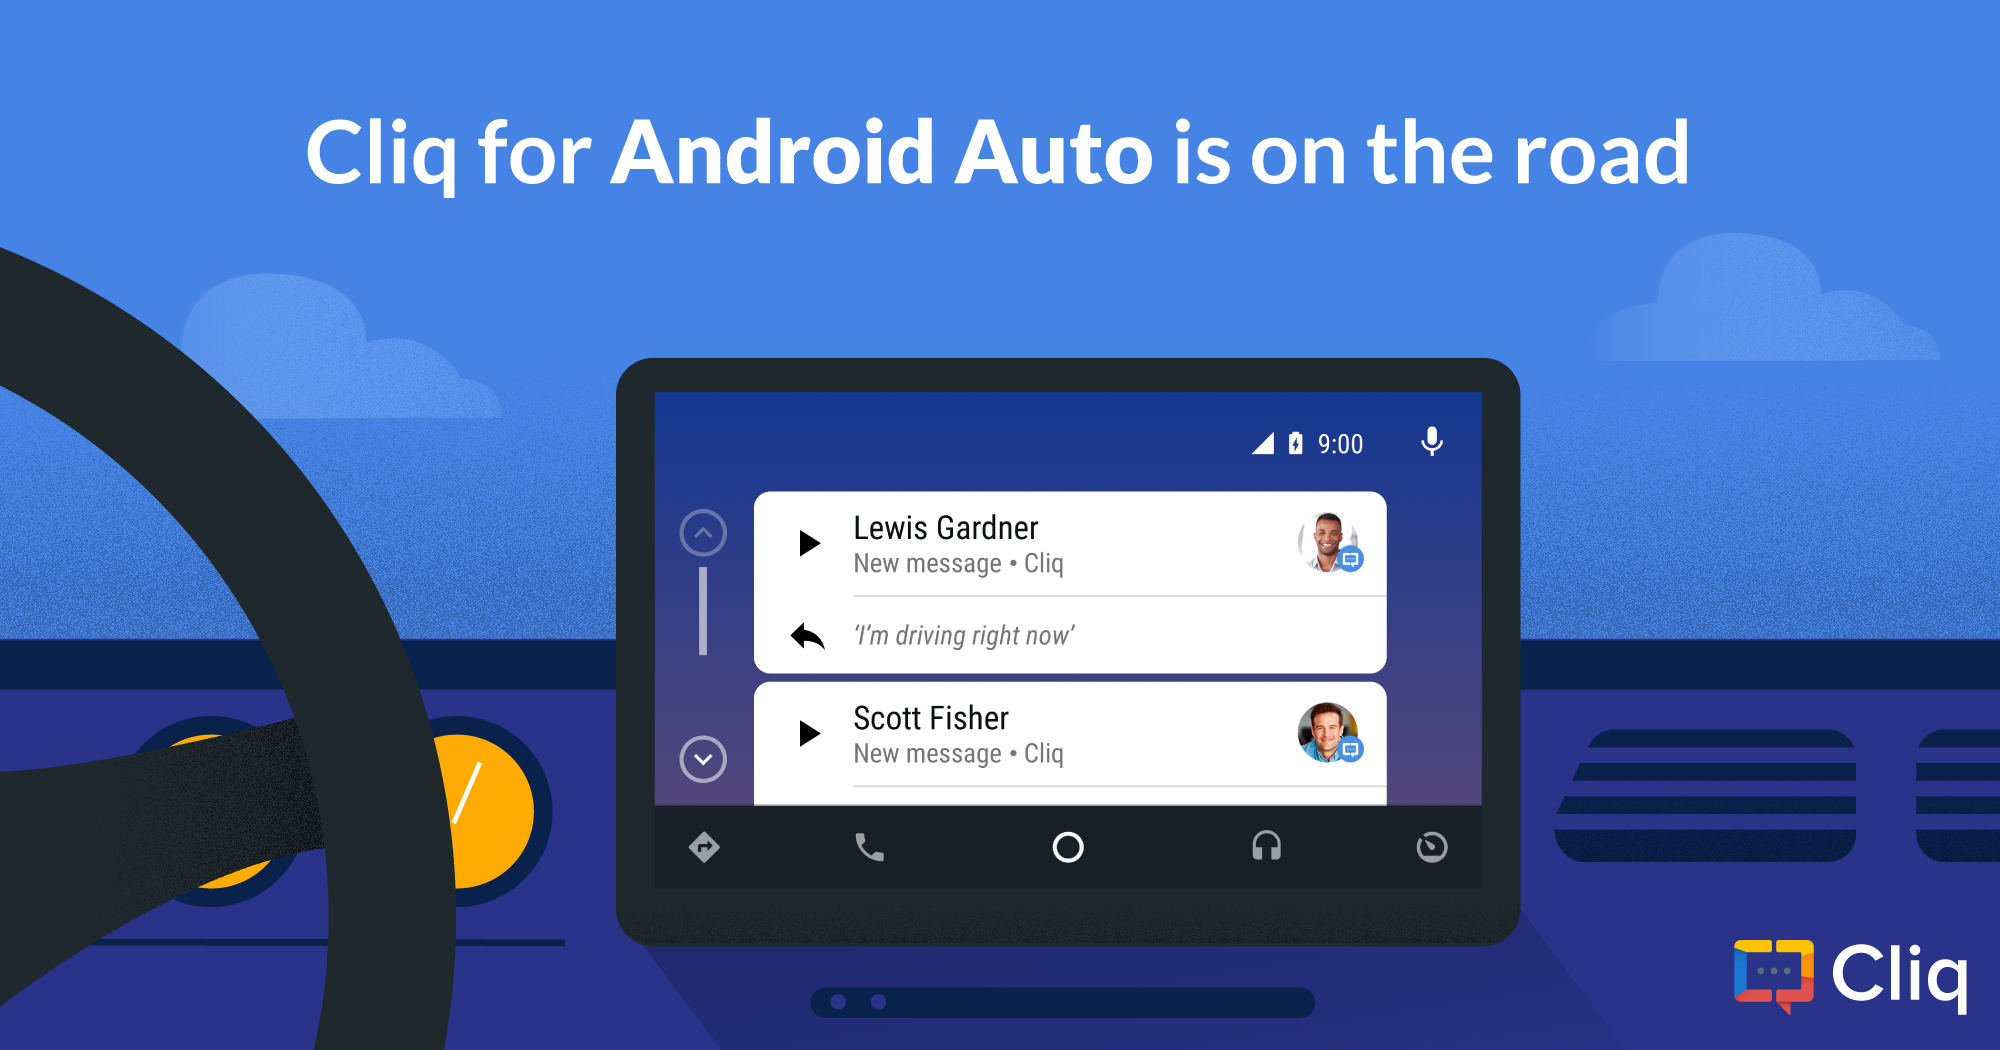 Cliq for Android Auto is on the road